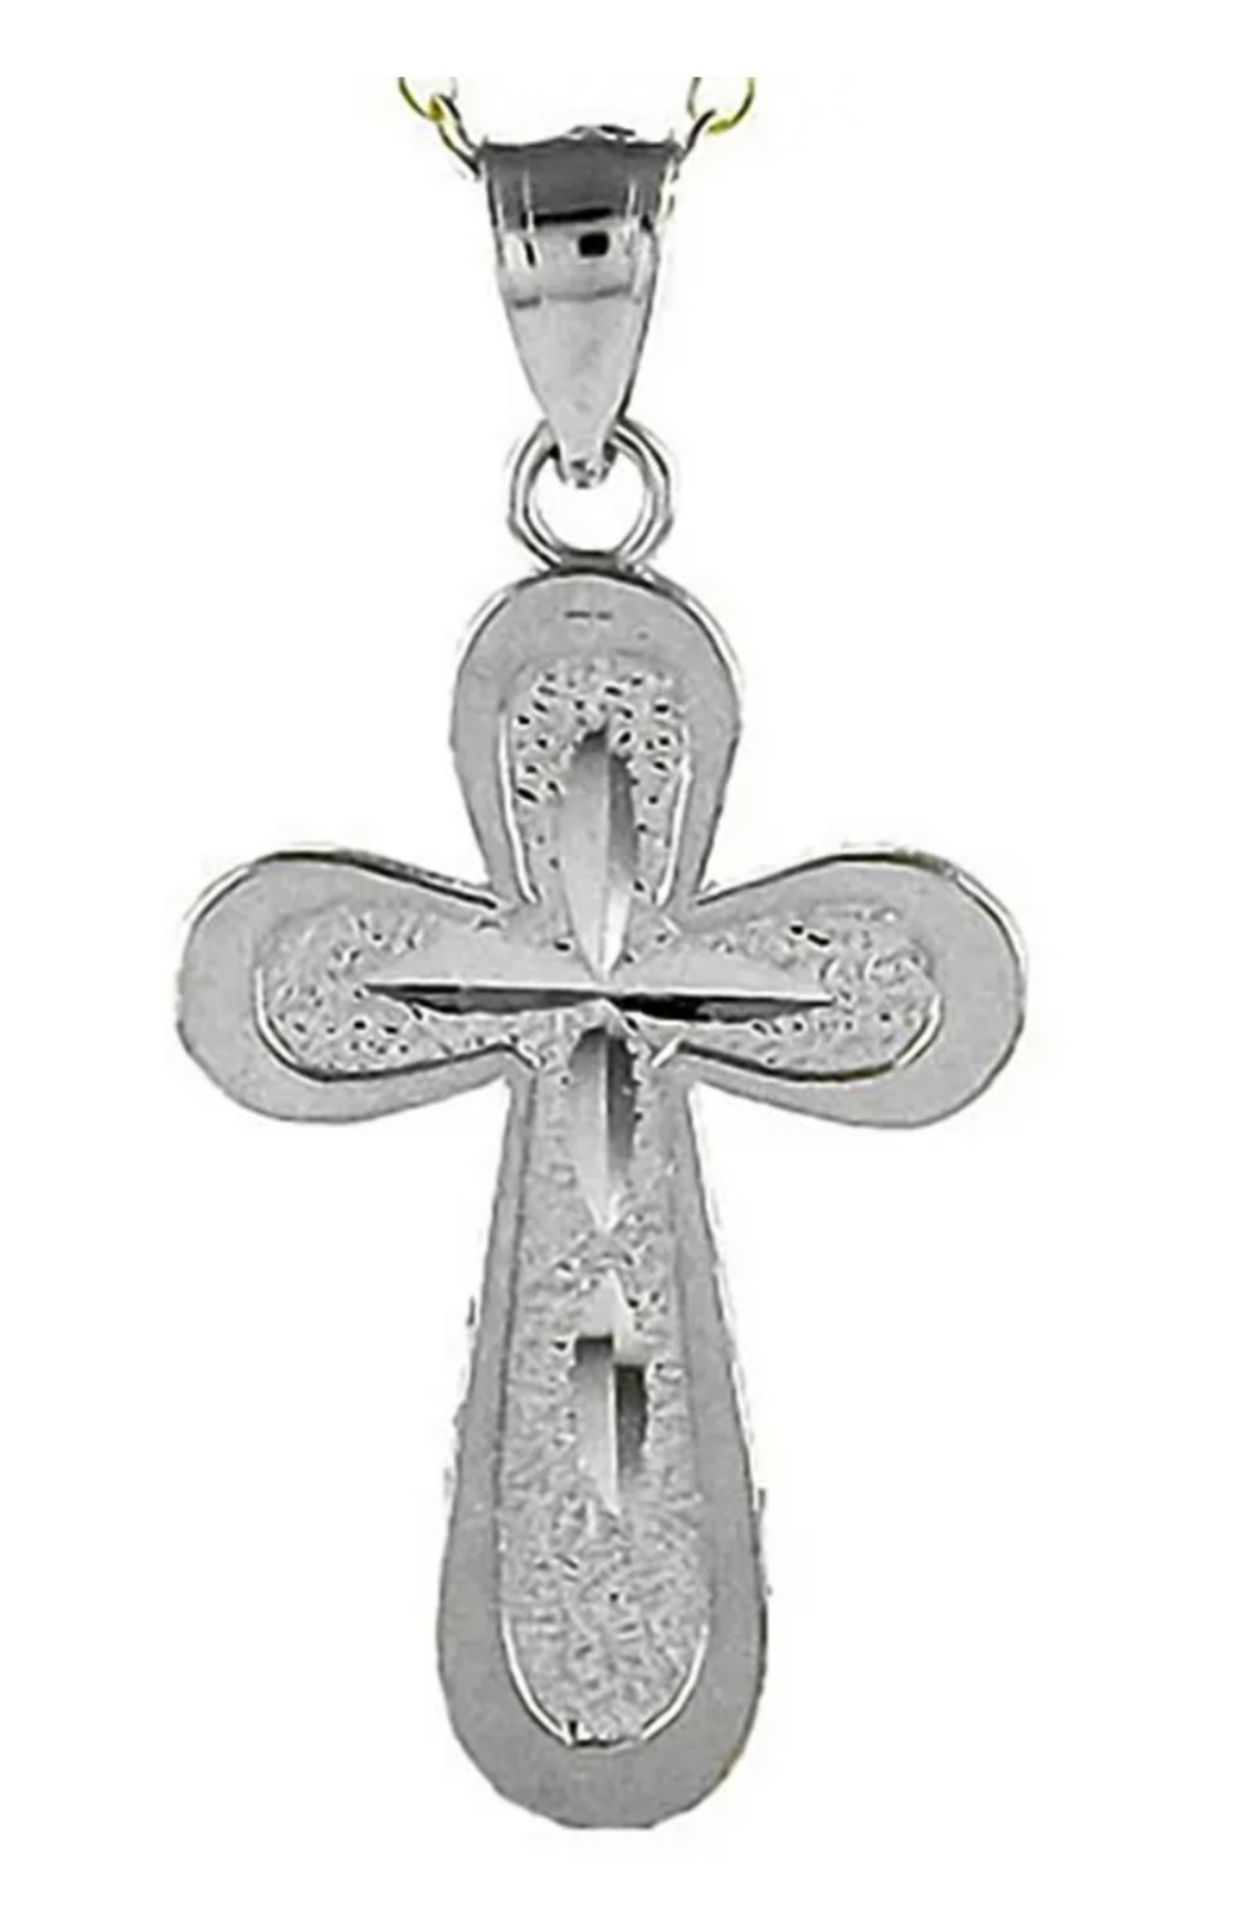 New! Sterling Silver Cross Pendant with Chain - Image 3 of 5